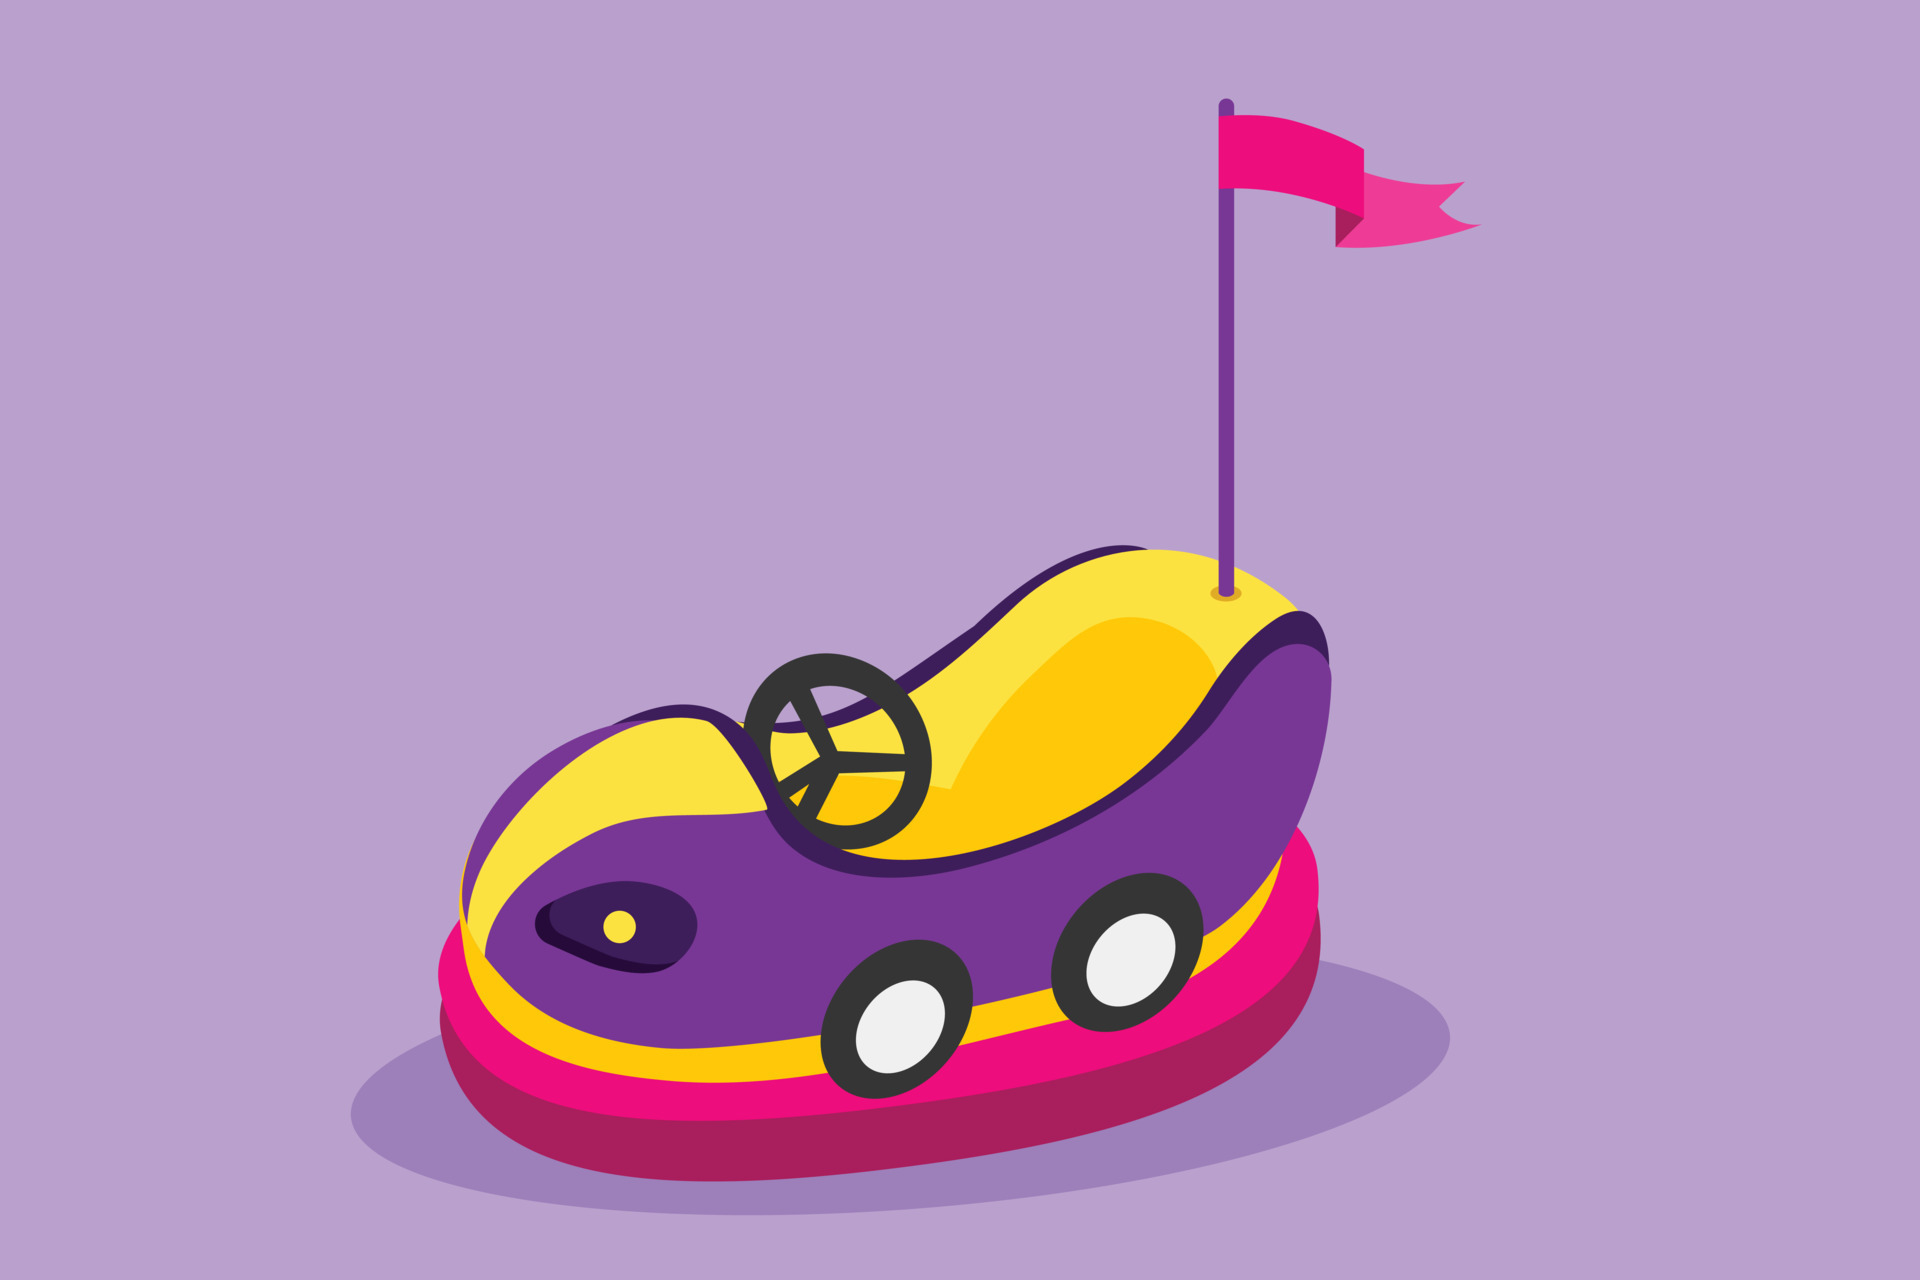 Cartoon flat style drawing colorful electric dodgem car in amusement park  arena with flag on top of antenna. Happy childhood memories playing bumper  car with friend. Graphic design vector illustration 15087783 Vector